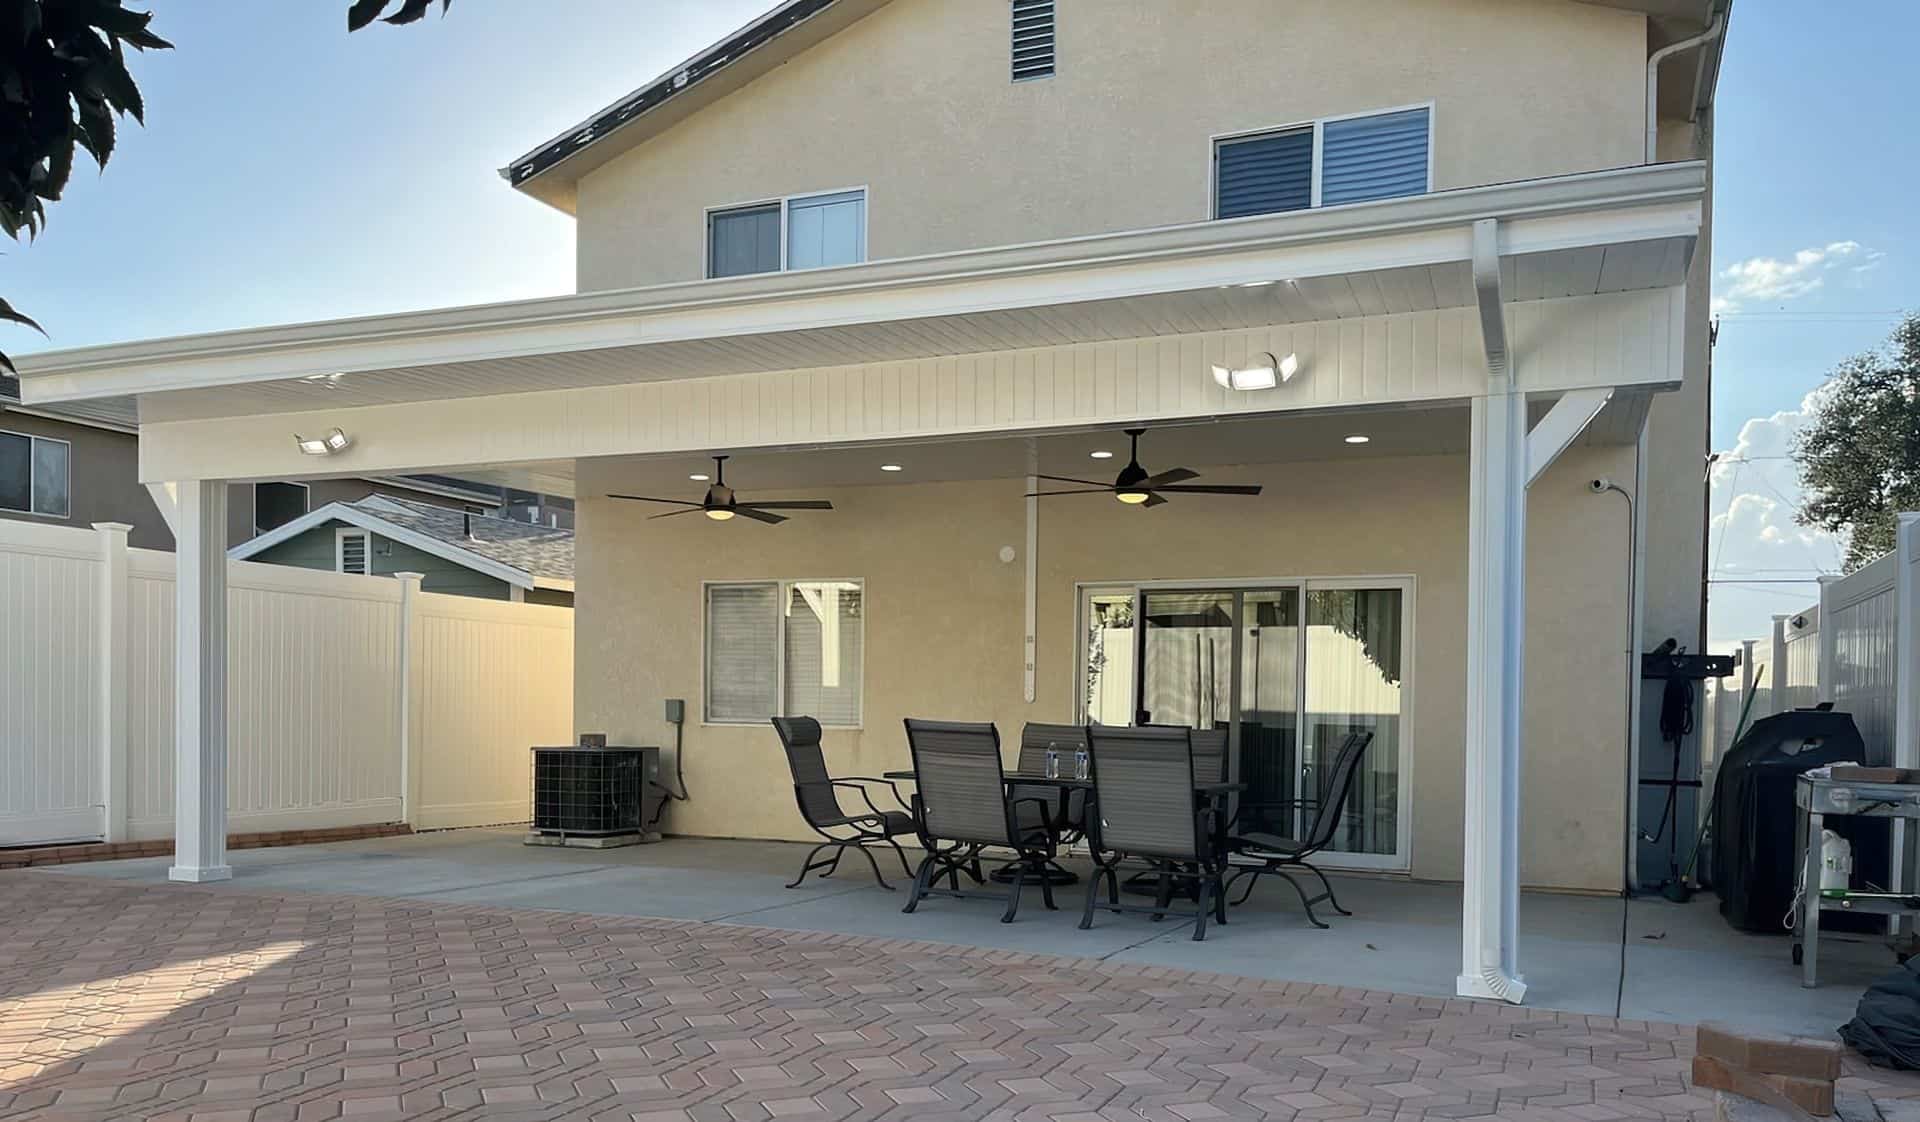 Outdoor furniture vinyl patio cover set under vinyl patio cover with ceiling fan. Concrete floor, vinyl fence, and table with chairs completing the scene.